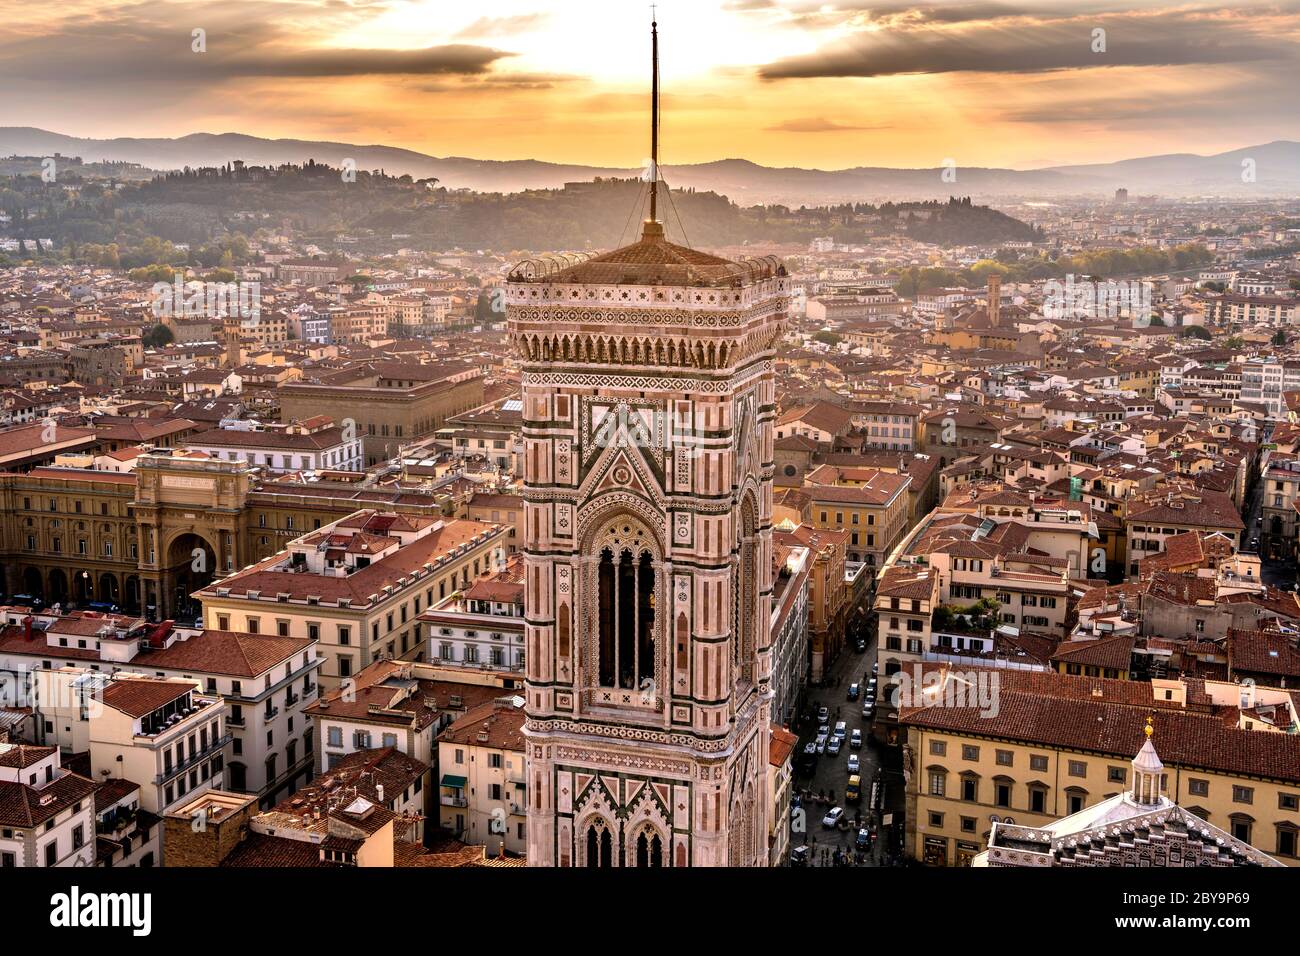 Sunset Florence - Colorful sunset view of Giotto's Campanile and Old Town of Florence, as seen from top of Brunelleschi's Dome of Florence Cathedral. Stock Photo